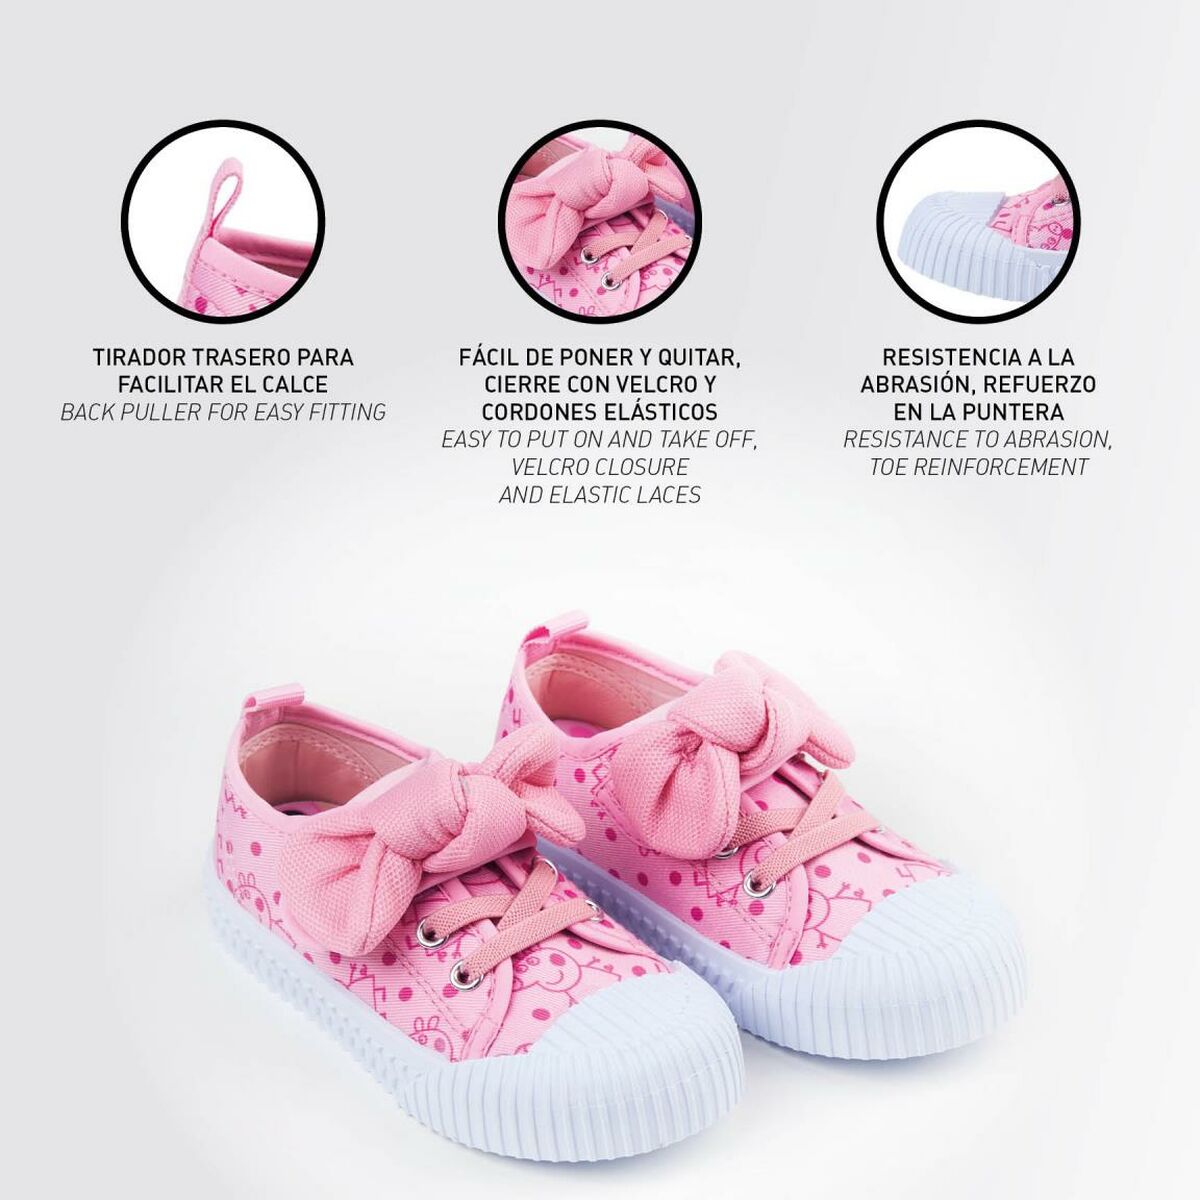 Chaussures casual Peppa Pig Enfant Rose